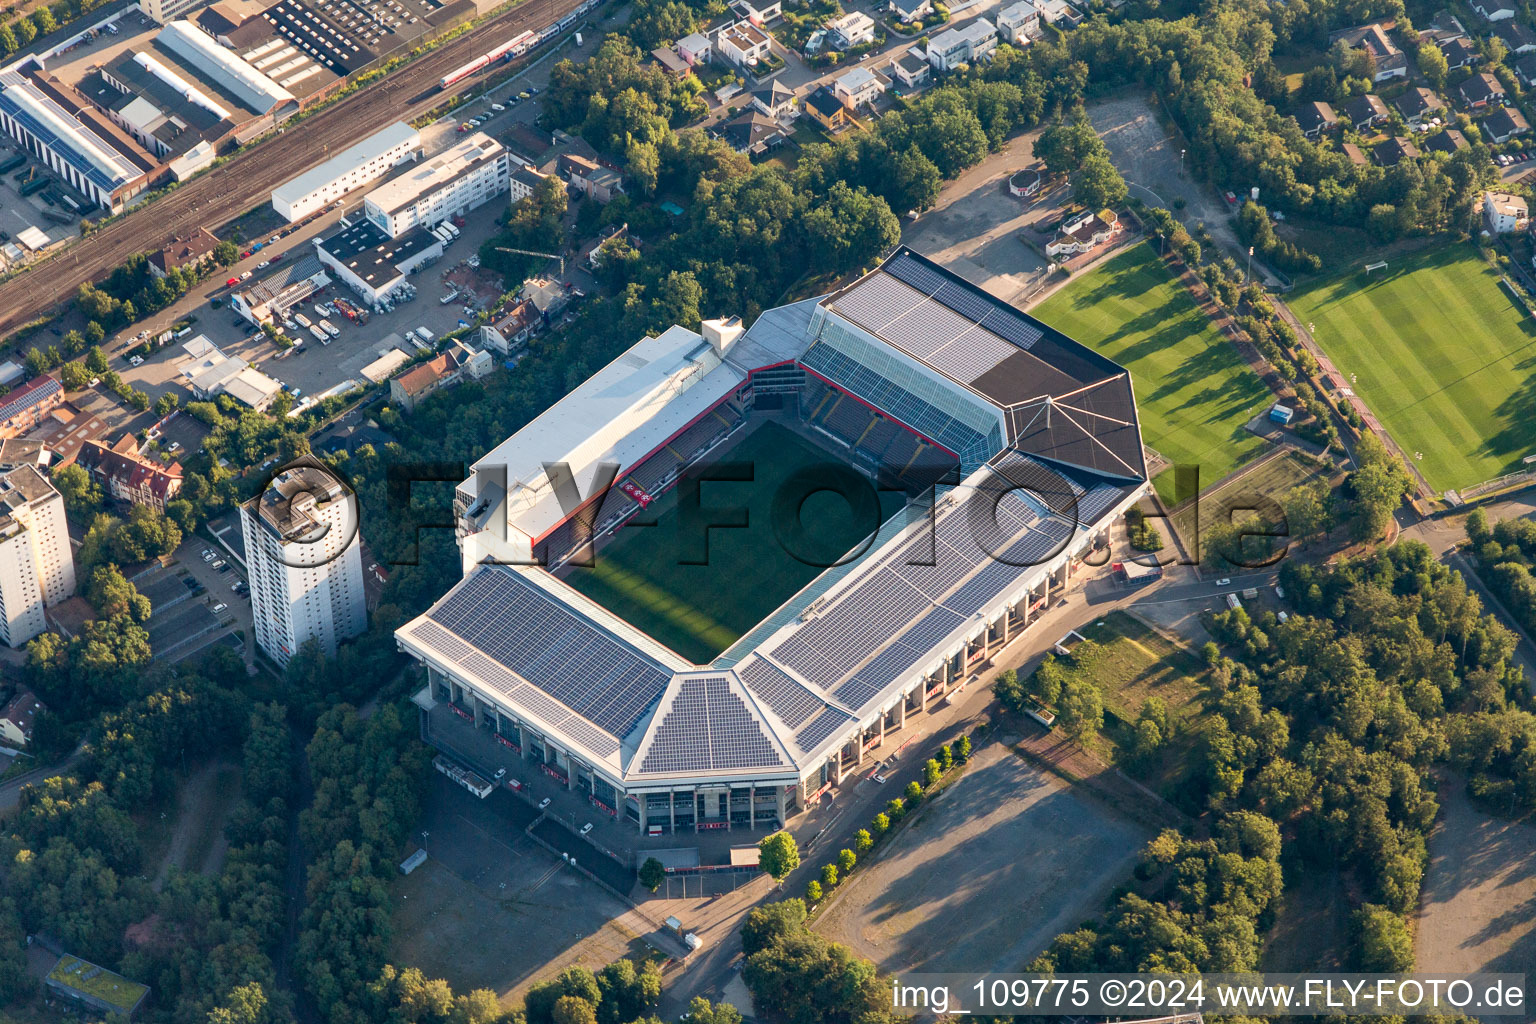 Aerial view of Sports facility grounds of the Arena stadium " Fritz-Walter-Stadion " in destrict Betzenberg on Fritz-Walter-Strasse in Kaiserslautern in the state Rhineland-Palatinate, Germany